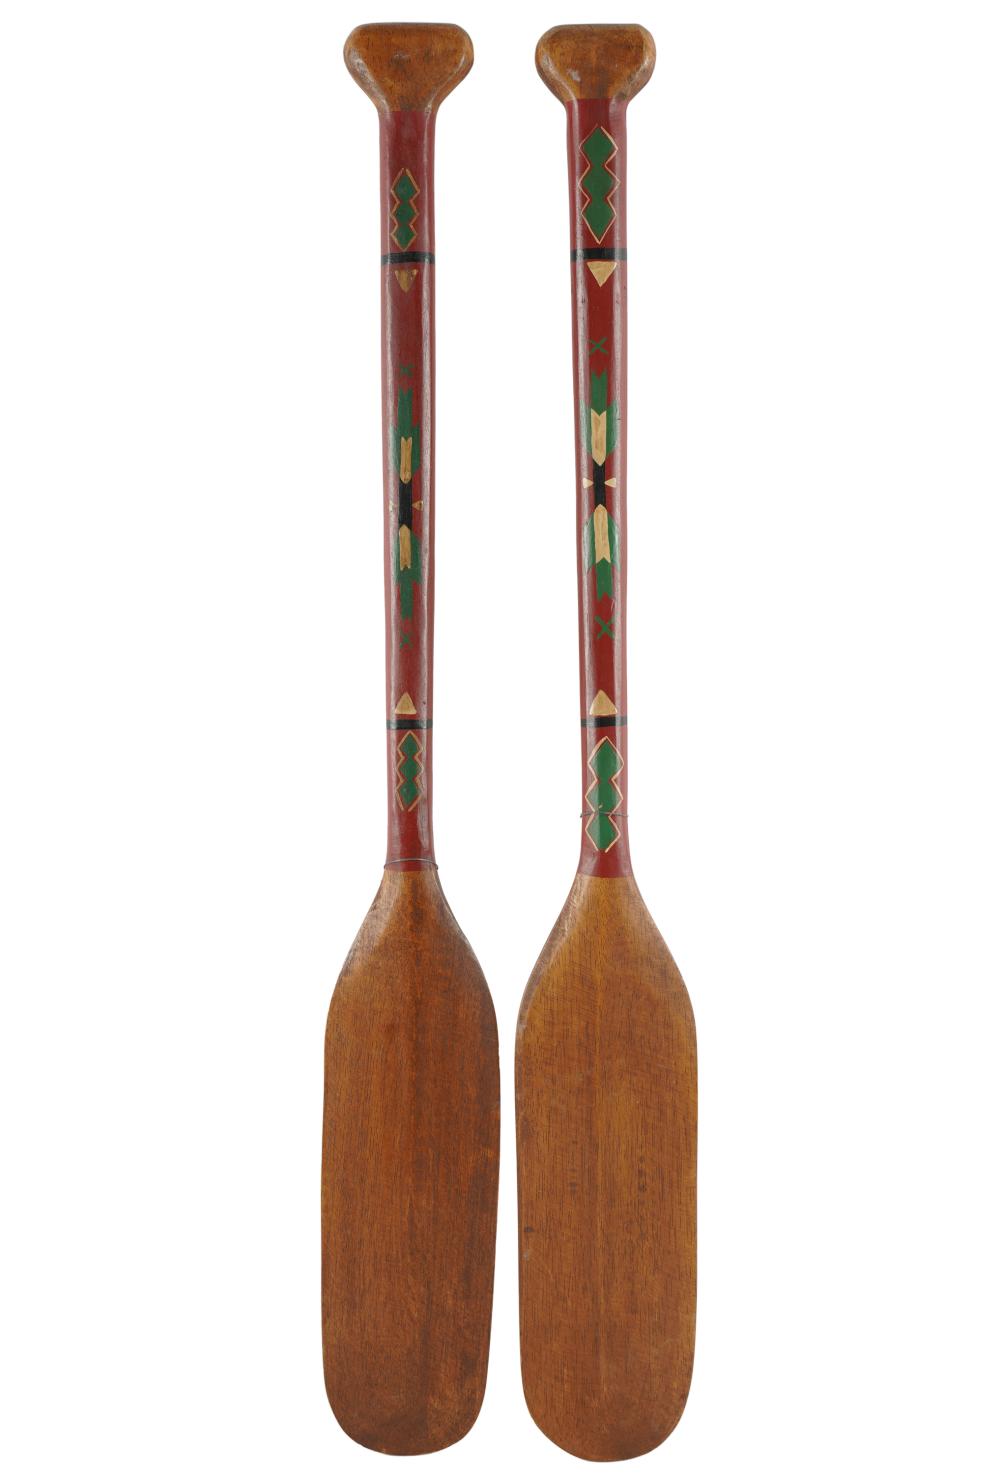 PAIR OF PAINTED WOOD PADDLESProvenance  332104